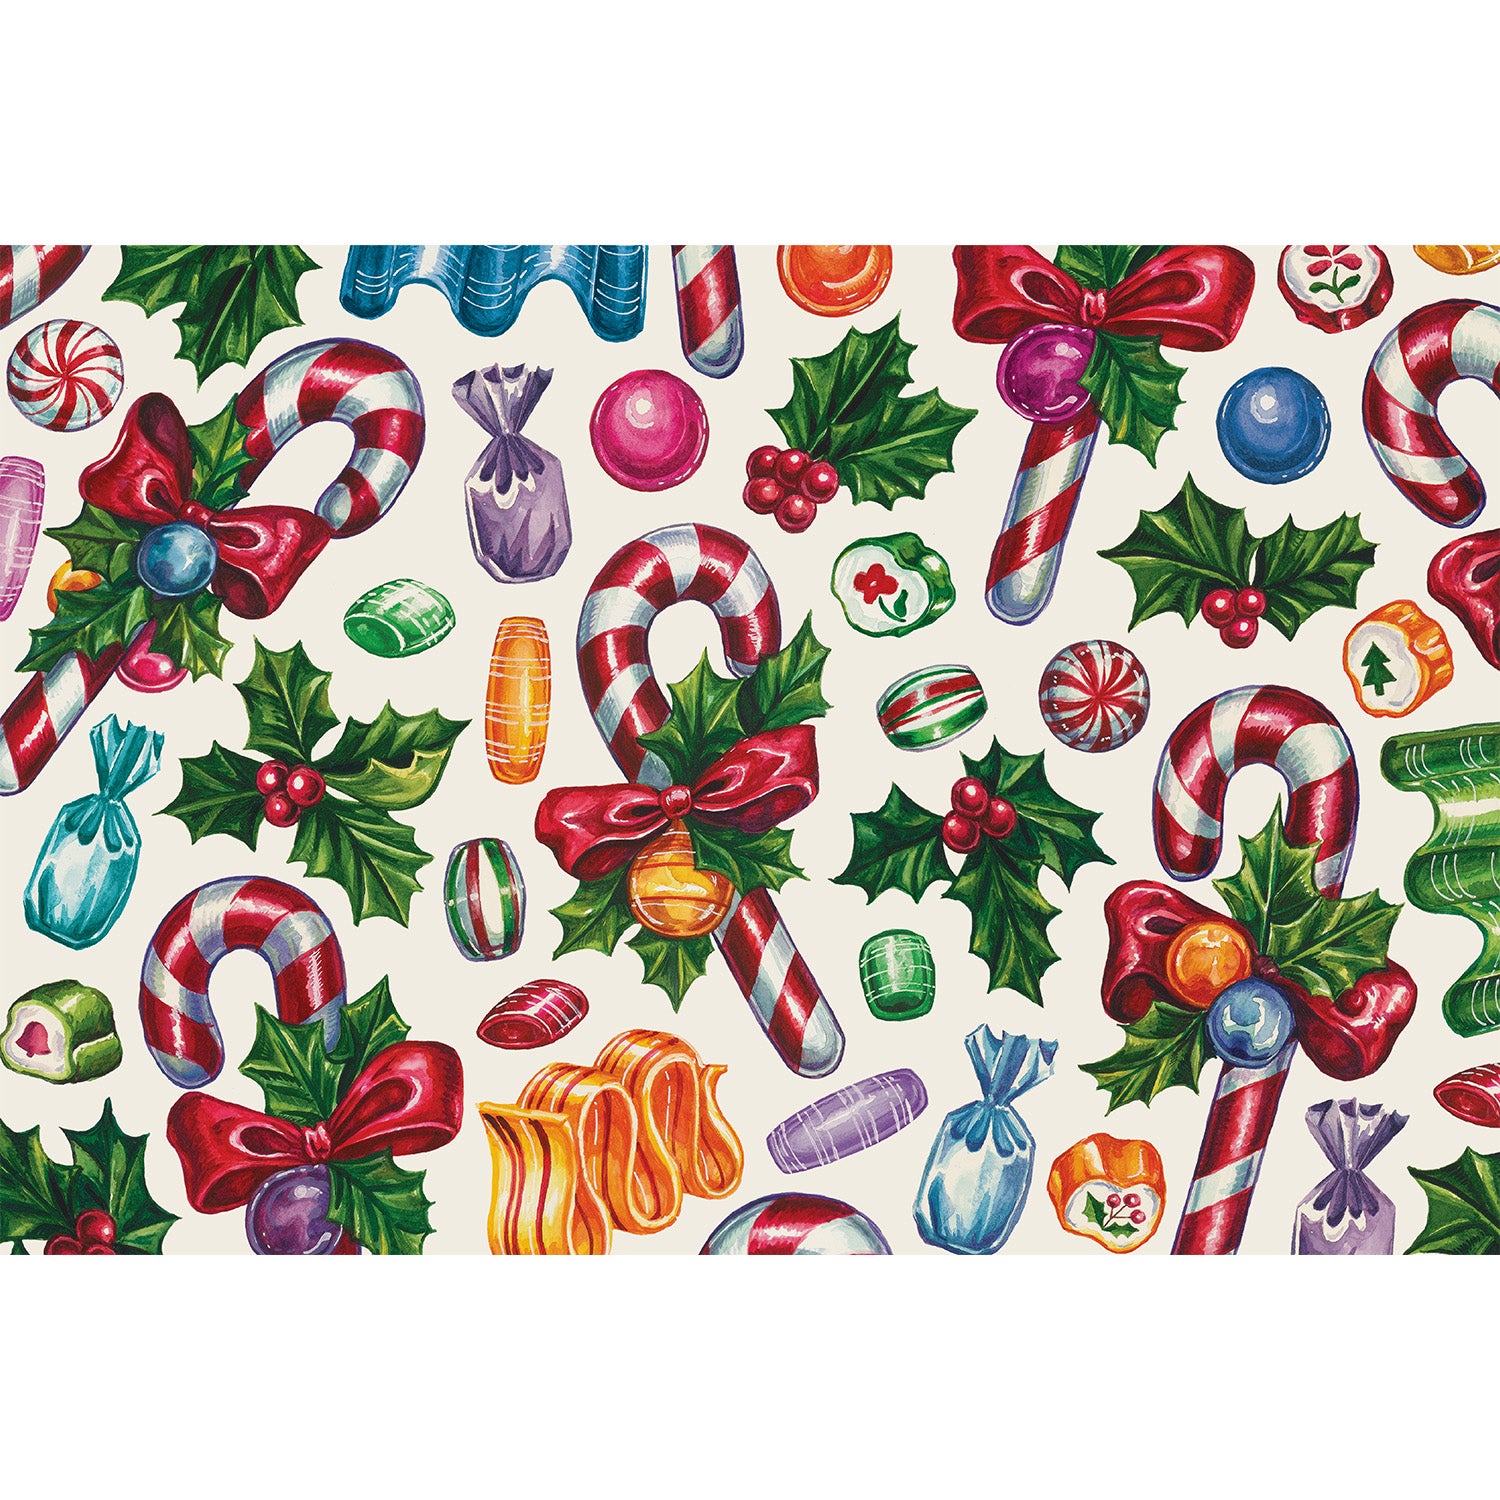 Placemat with white background with candy canes and vintage candy with green sprigs